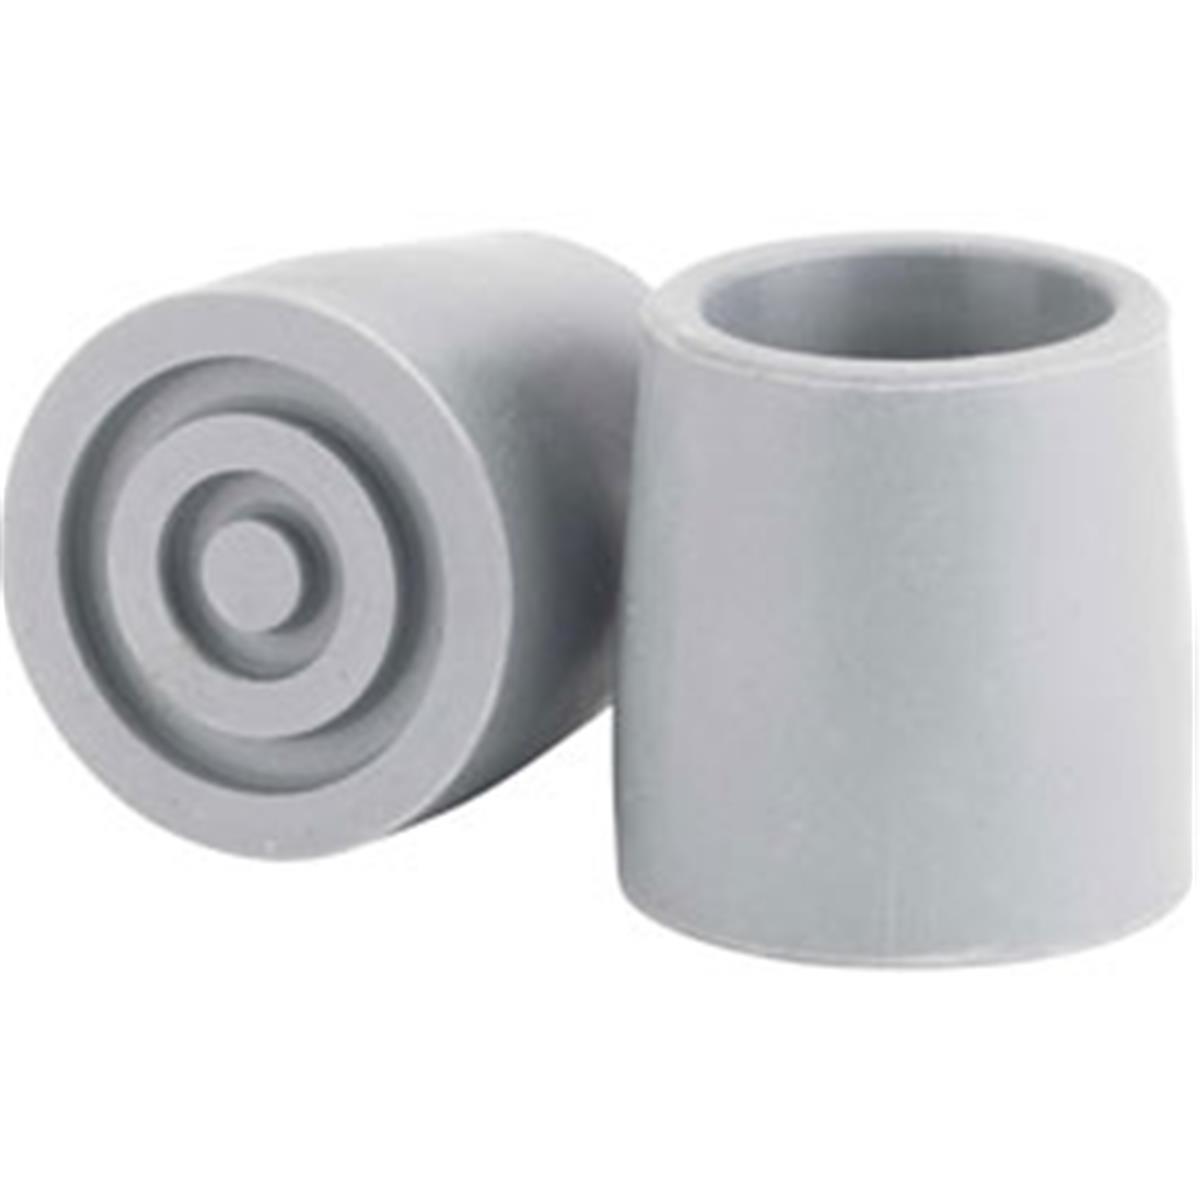 Completemedical Rtl10386gb 1.125 In. Utility Walker Replacement Tip, Gray - 1 Each